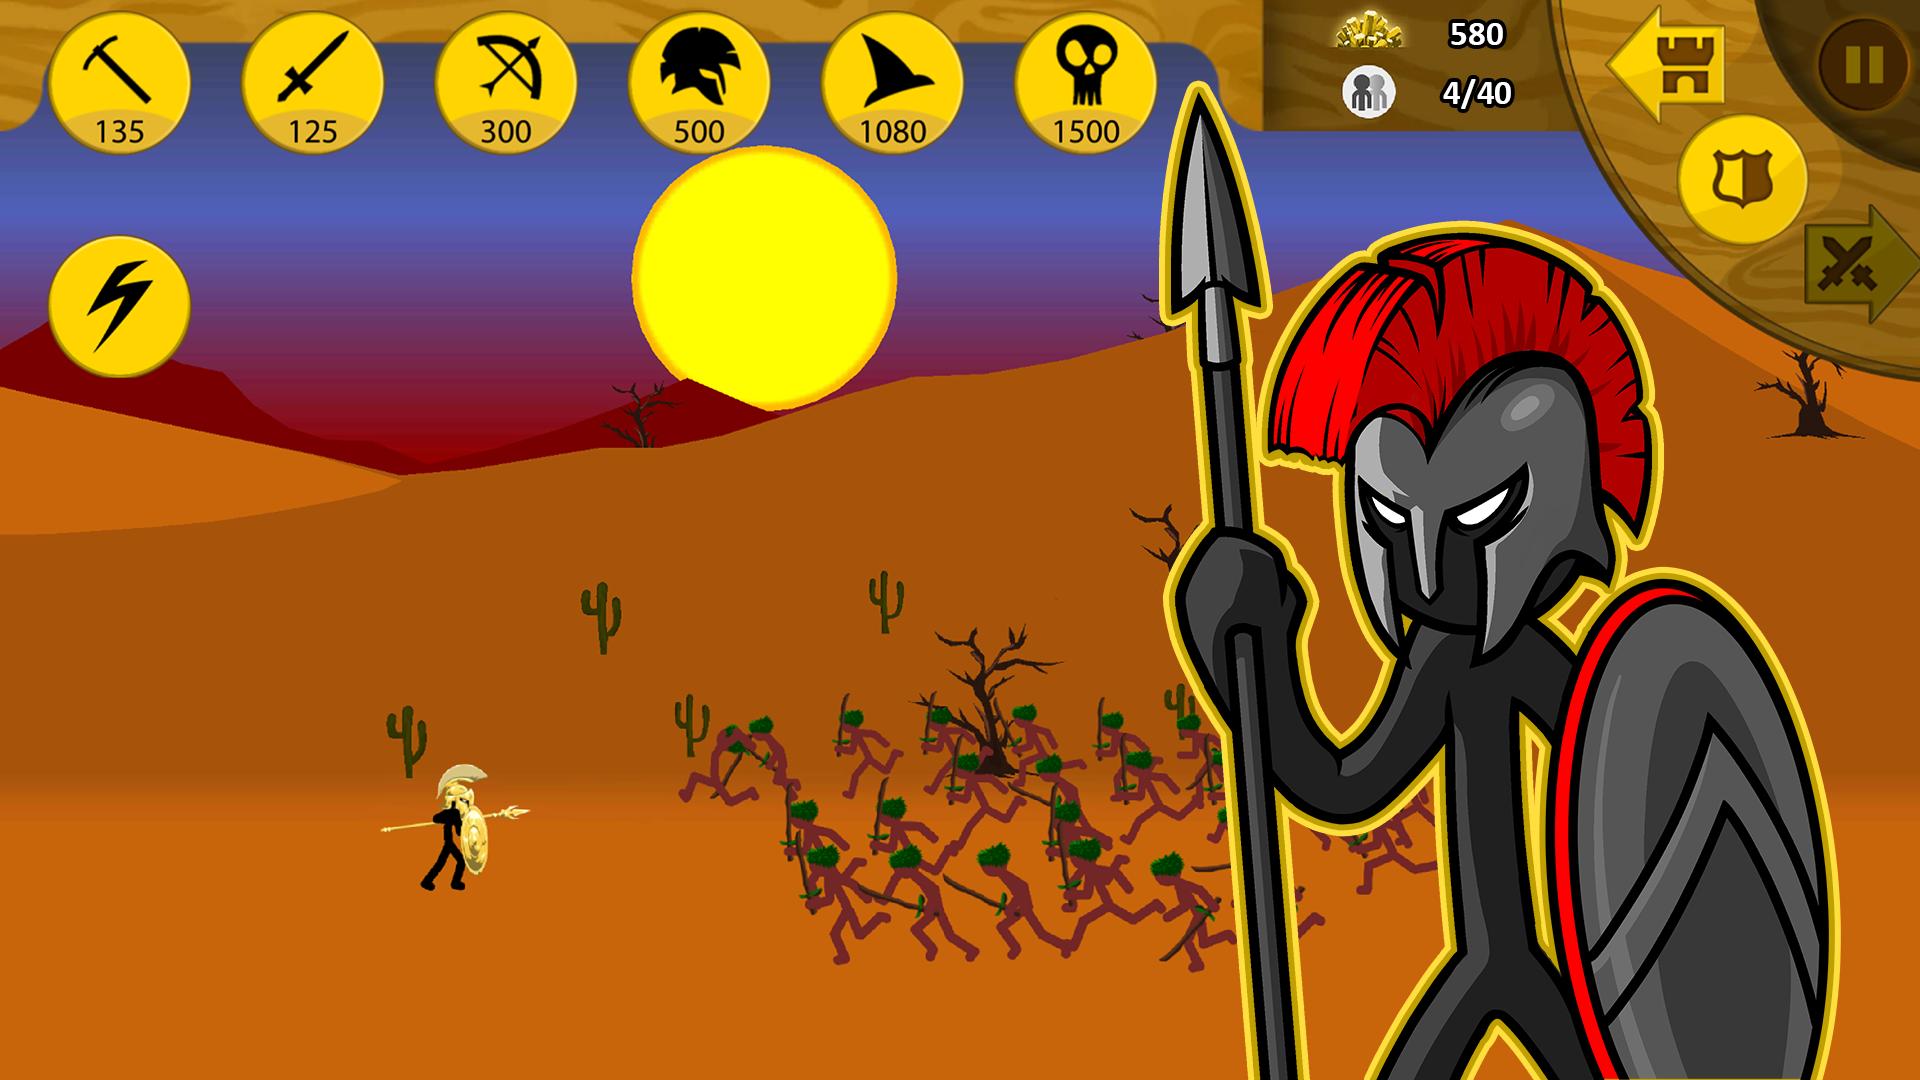 Download Stick War Legacy for PC/ Stick War Legacy on PC - Andy - Android  Emulator for PC & Mac